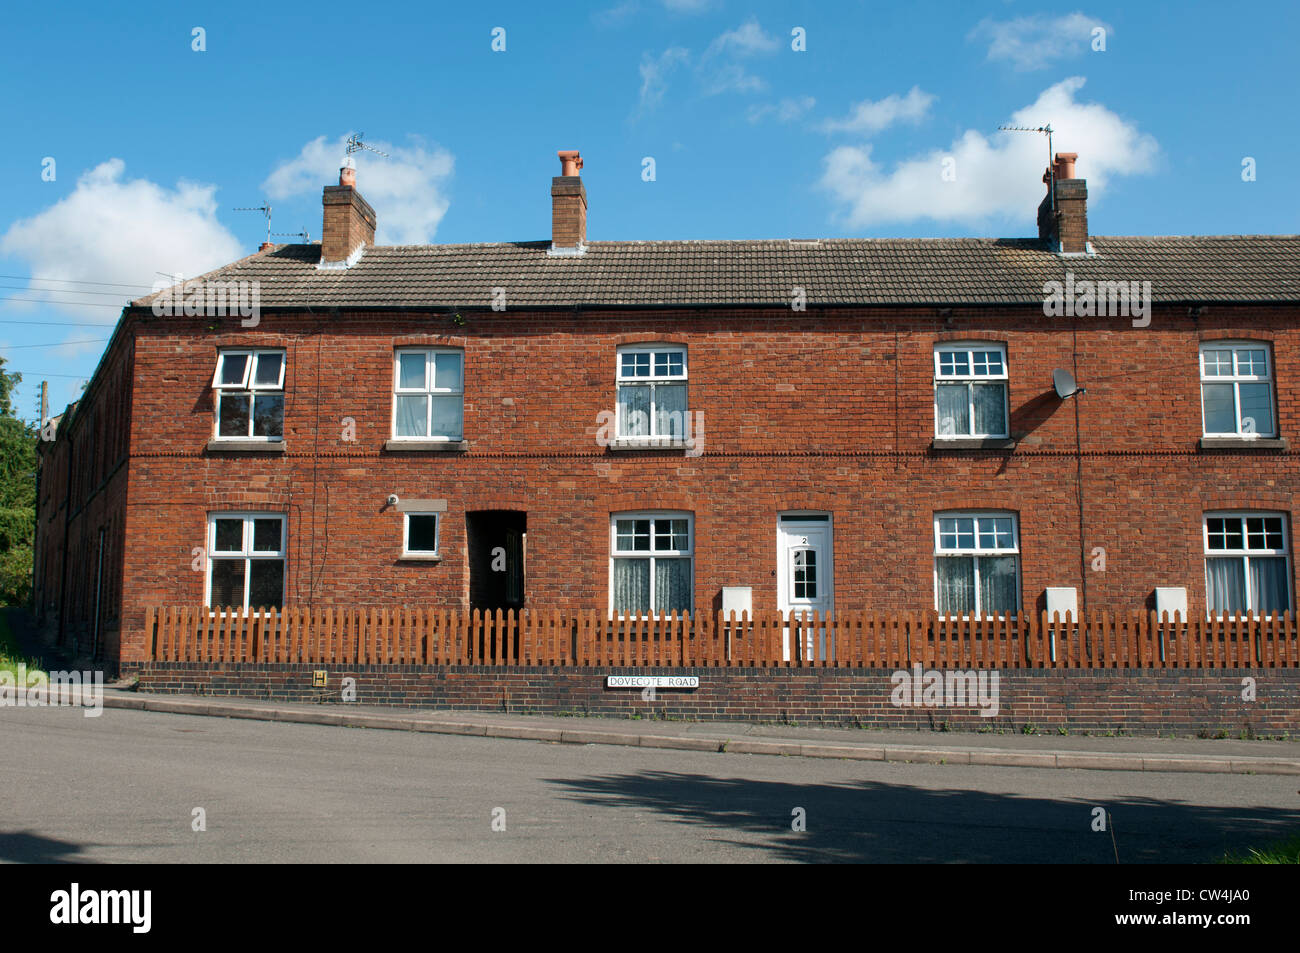 Terraced housing in Croft village, Leicestershire, UK Stock Photo